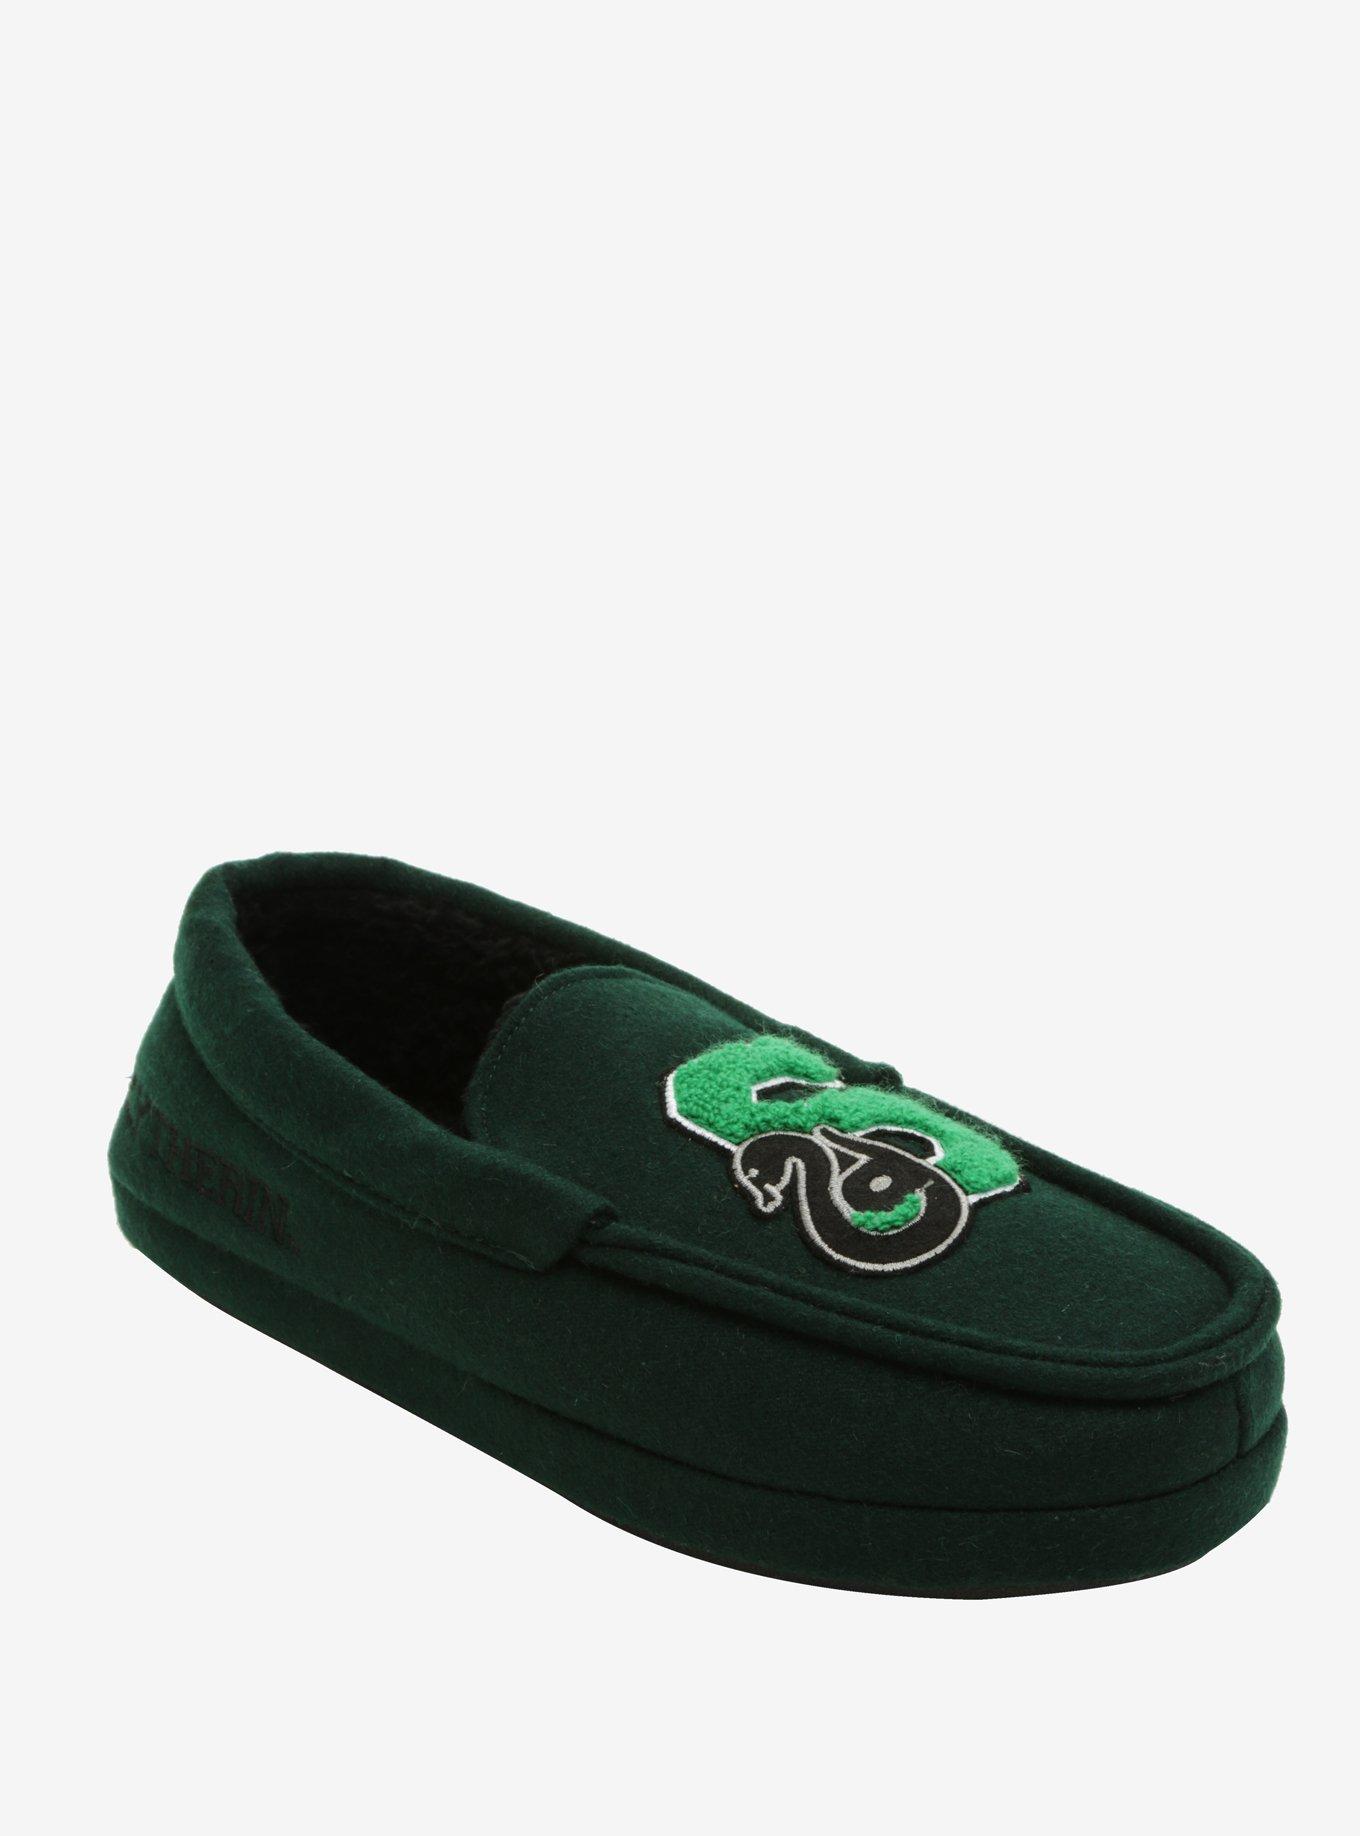 Harry Potter Slytherin Moccasin Slippers, GREEN, hi-res